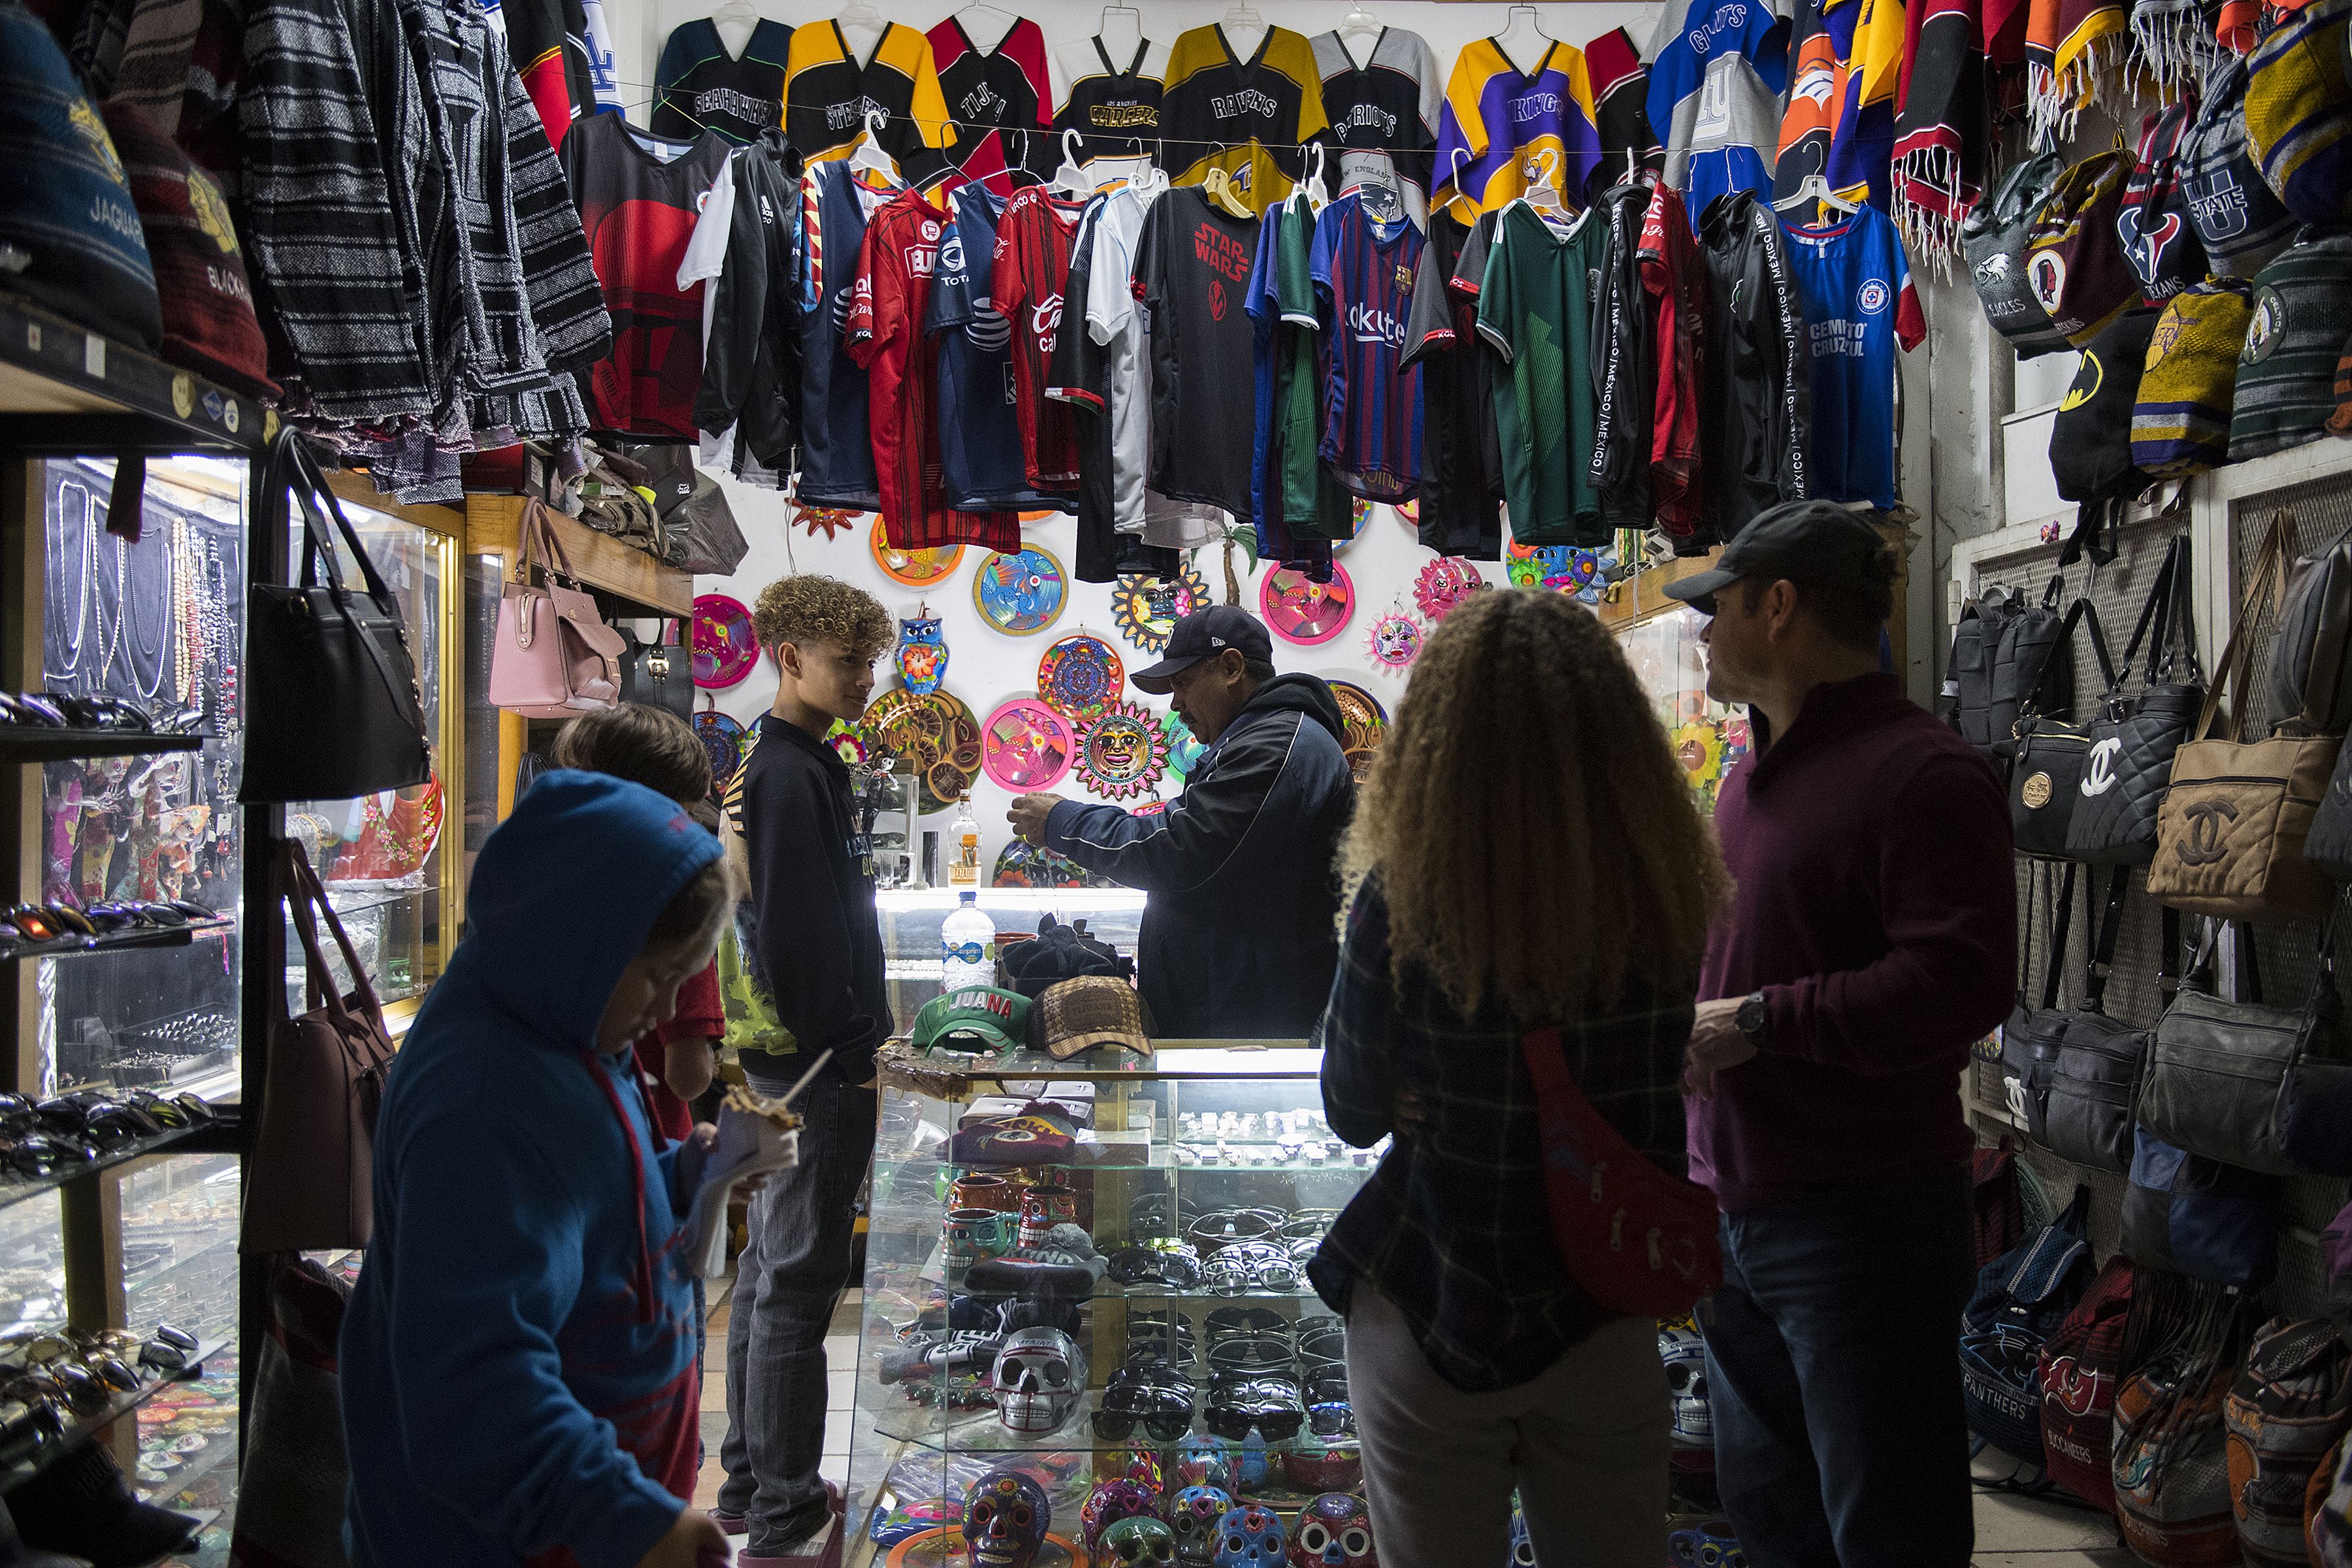 Raymond Flores looks to his father, Ramon, right, for approval as he shops for his birthday present with his siblings along Avenida Revolucion in Tijuana, Mexico. The chain costs 750 pesos, which is approximately $38. Ramon, who makes around $110 a week, said he wanted him to have the gift. "When I get the opportunity to give them something they want, I feel good," he said. Image by Amanda Cowan. Mexico, 2019.